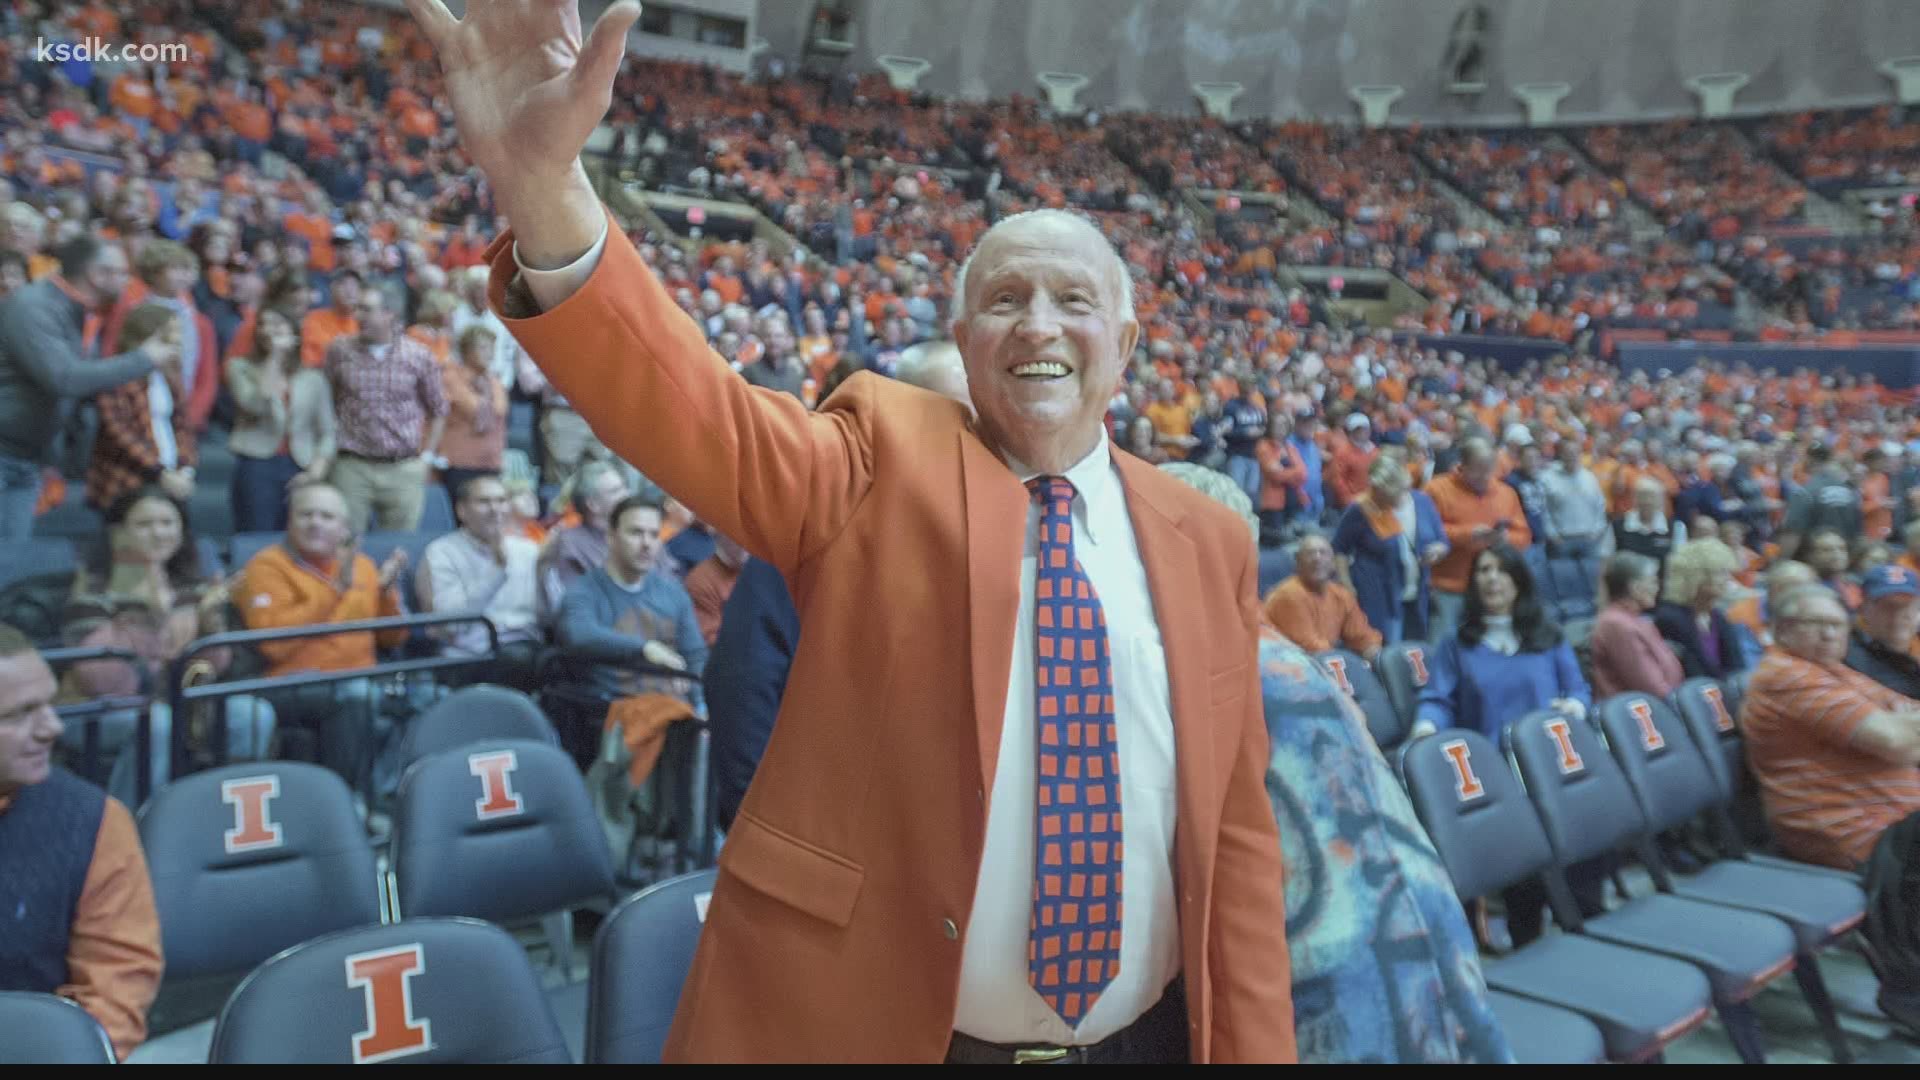 “His achievements are legendary, but what is immeasurable are the countless lives he impacted during his 21 years in Champaign and 41 years in coaching"